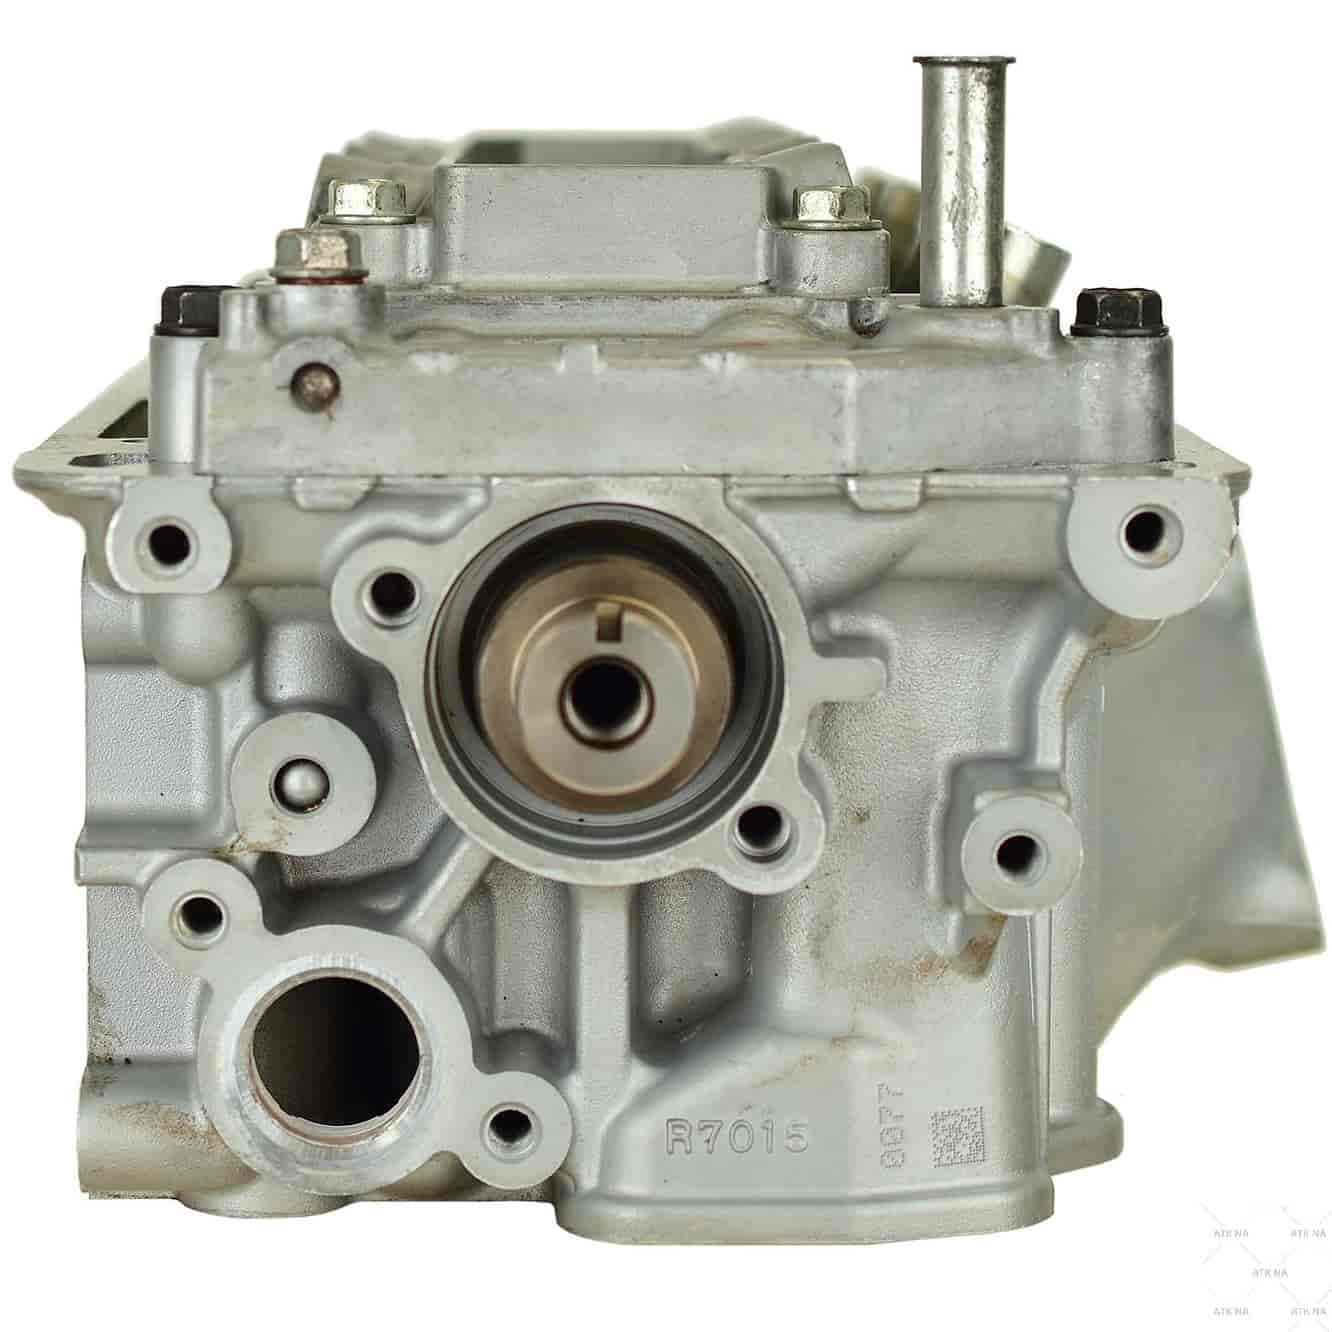 Remanufactured Cylinder Head for 2009-2013 Acura/Honda with 3.5L/3.7L V6